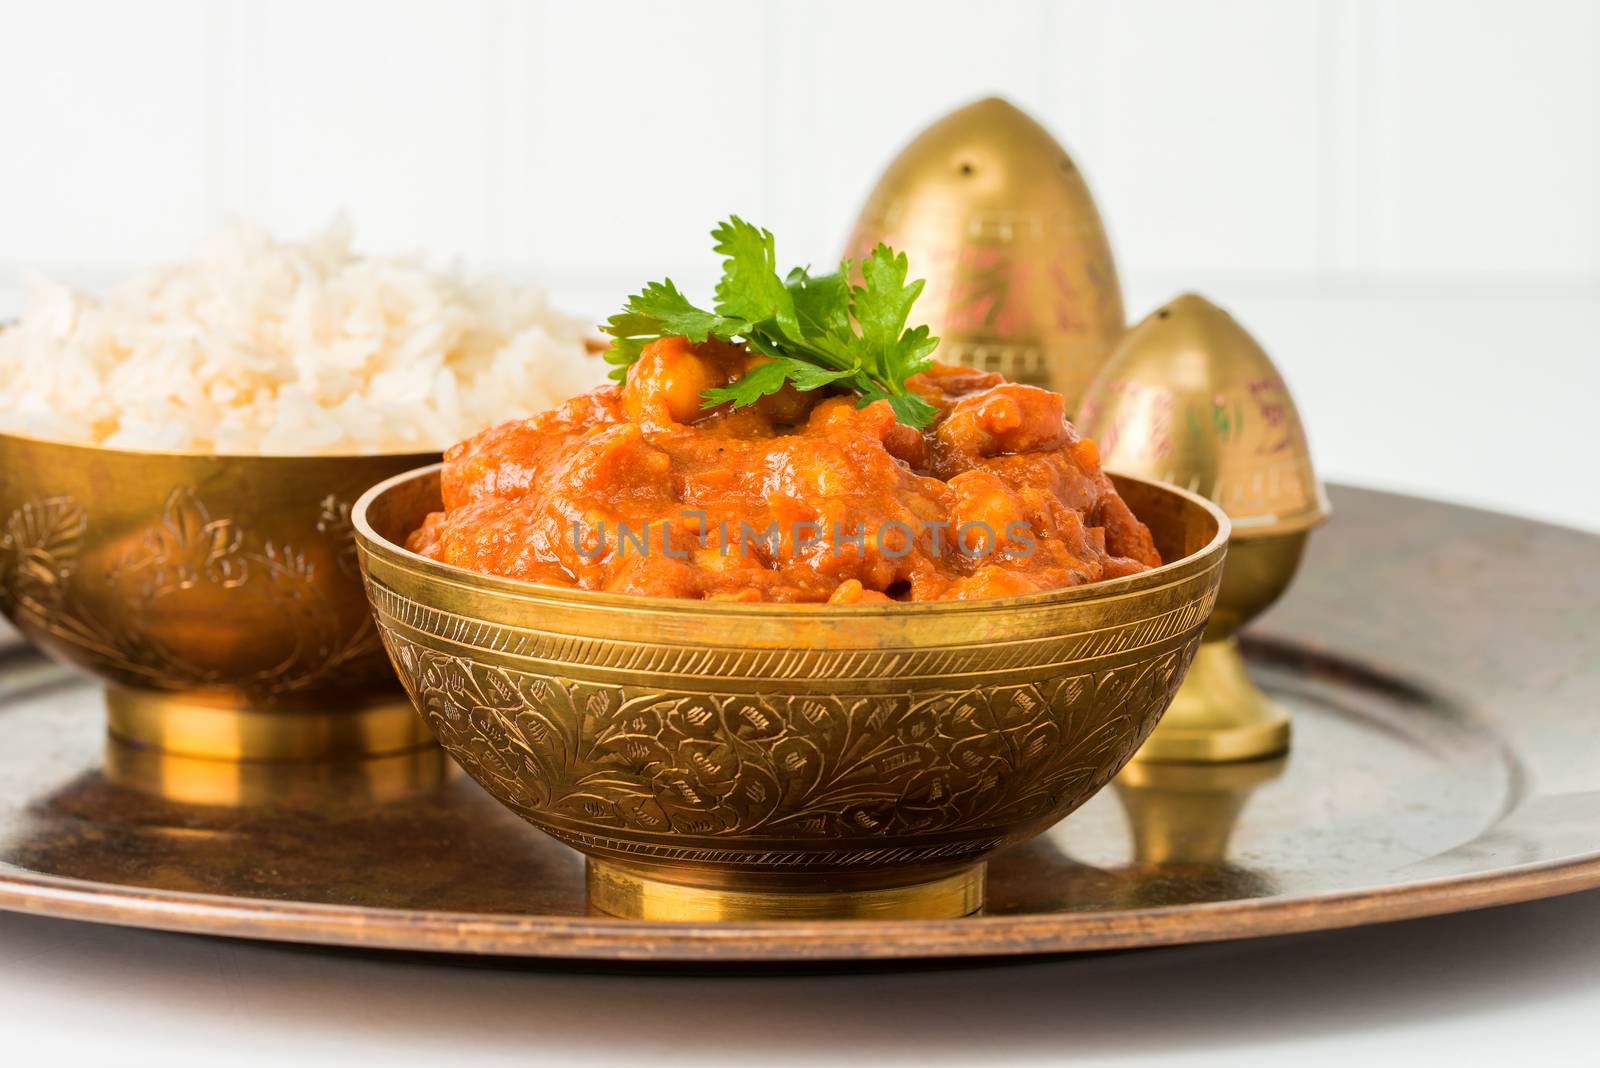 This East Indian dish consists of chick peas, tomato and onions in a spicy sauce.